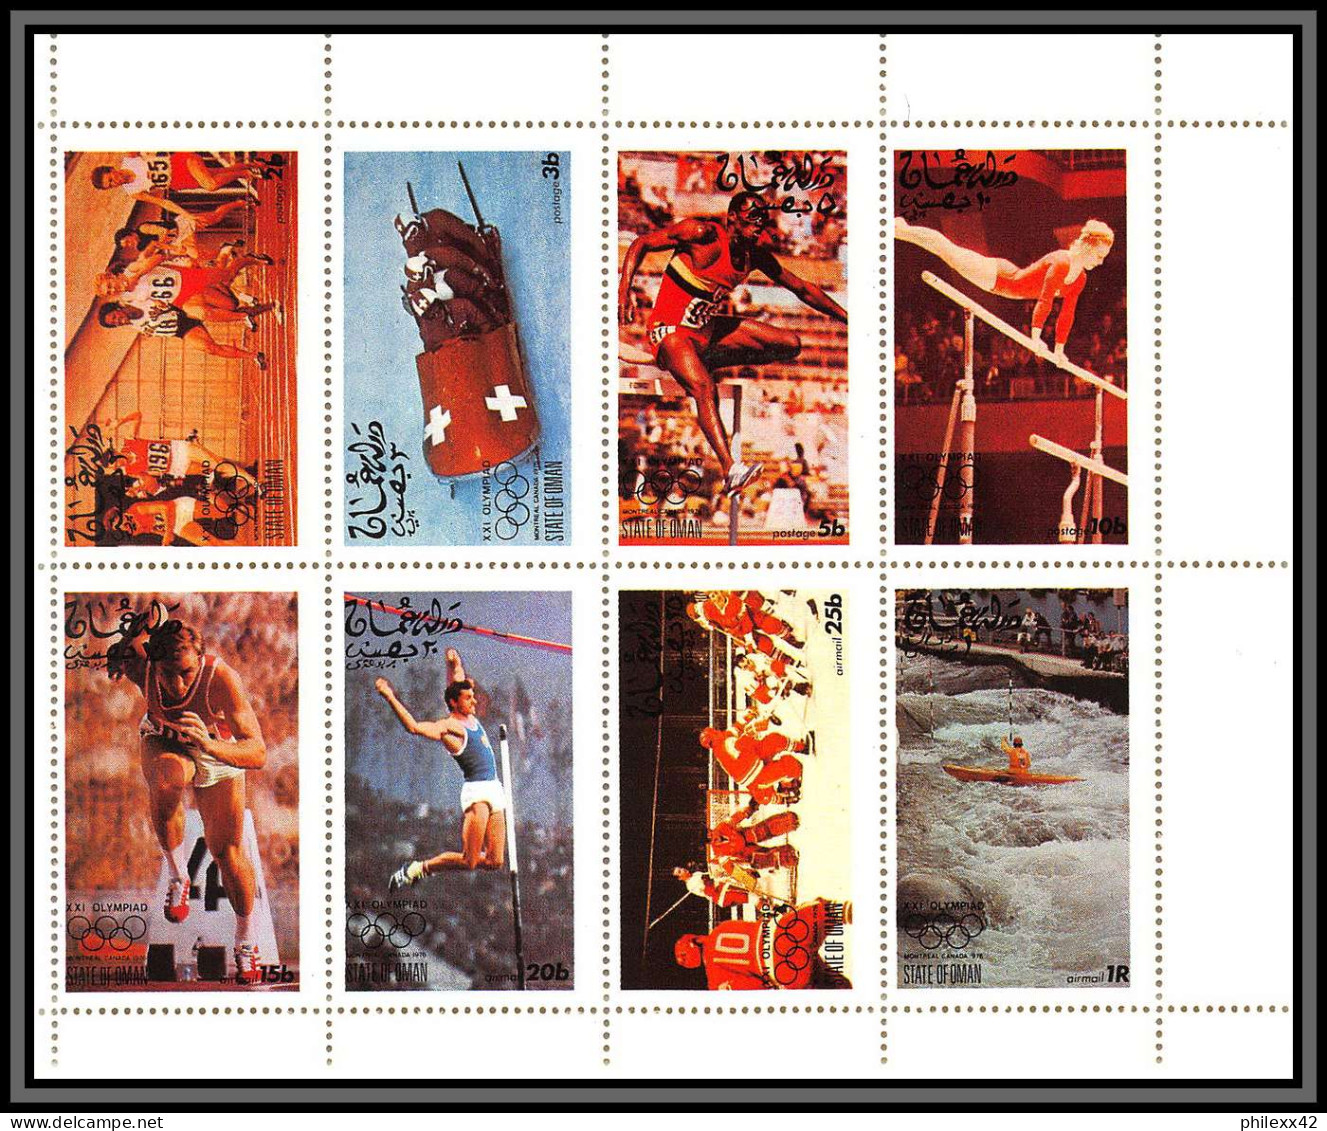 81665 Oman Bloc + Série Montreal Innsbruck 1976 Jeux Olympiques (olympic Games) ** MNH Hockey  - Inverno1976: Innsbruck